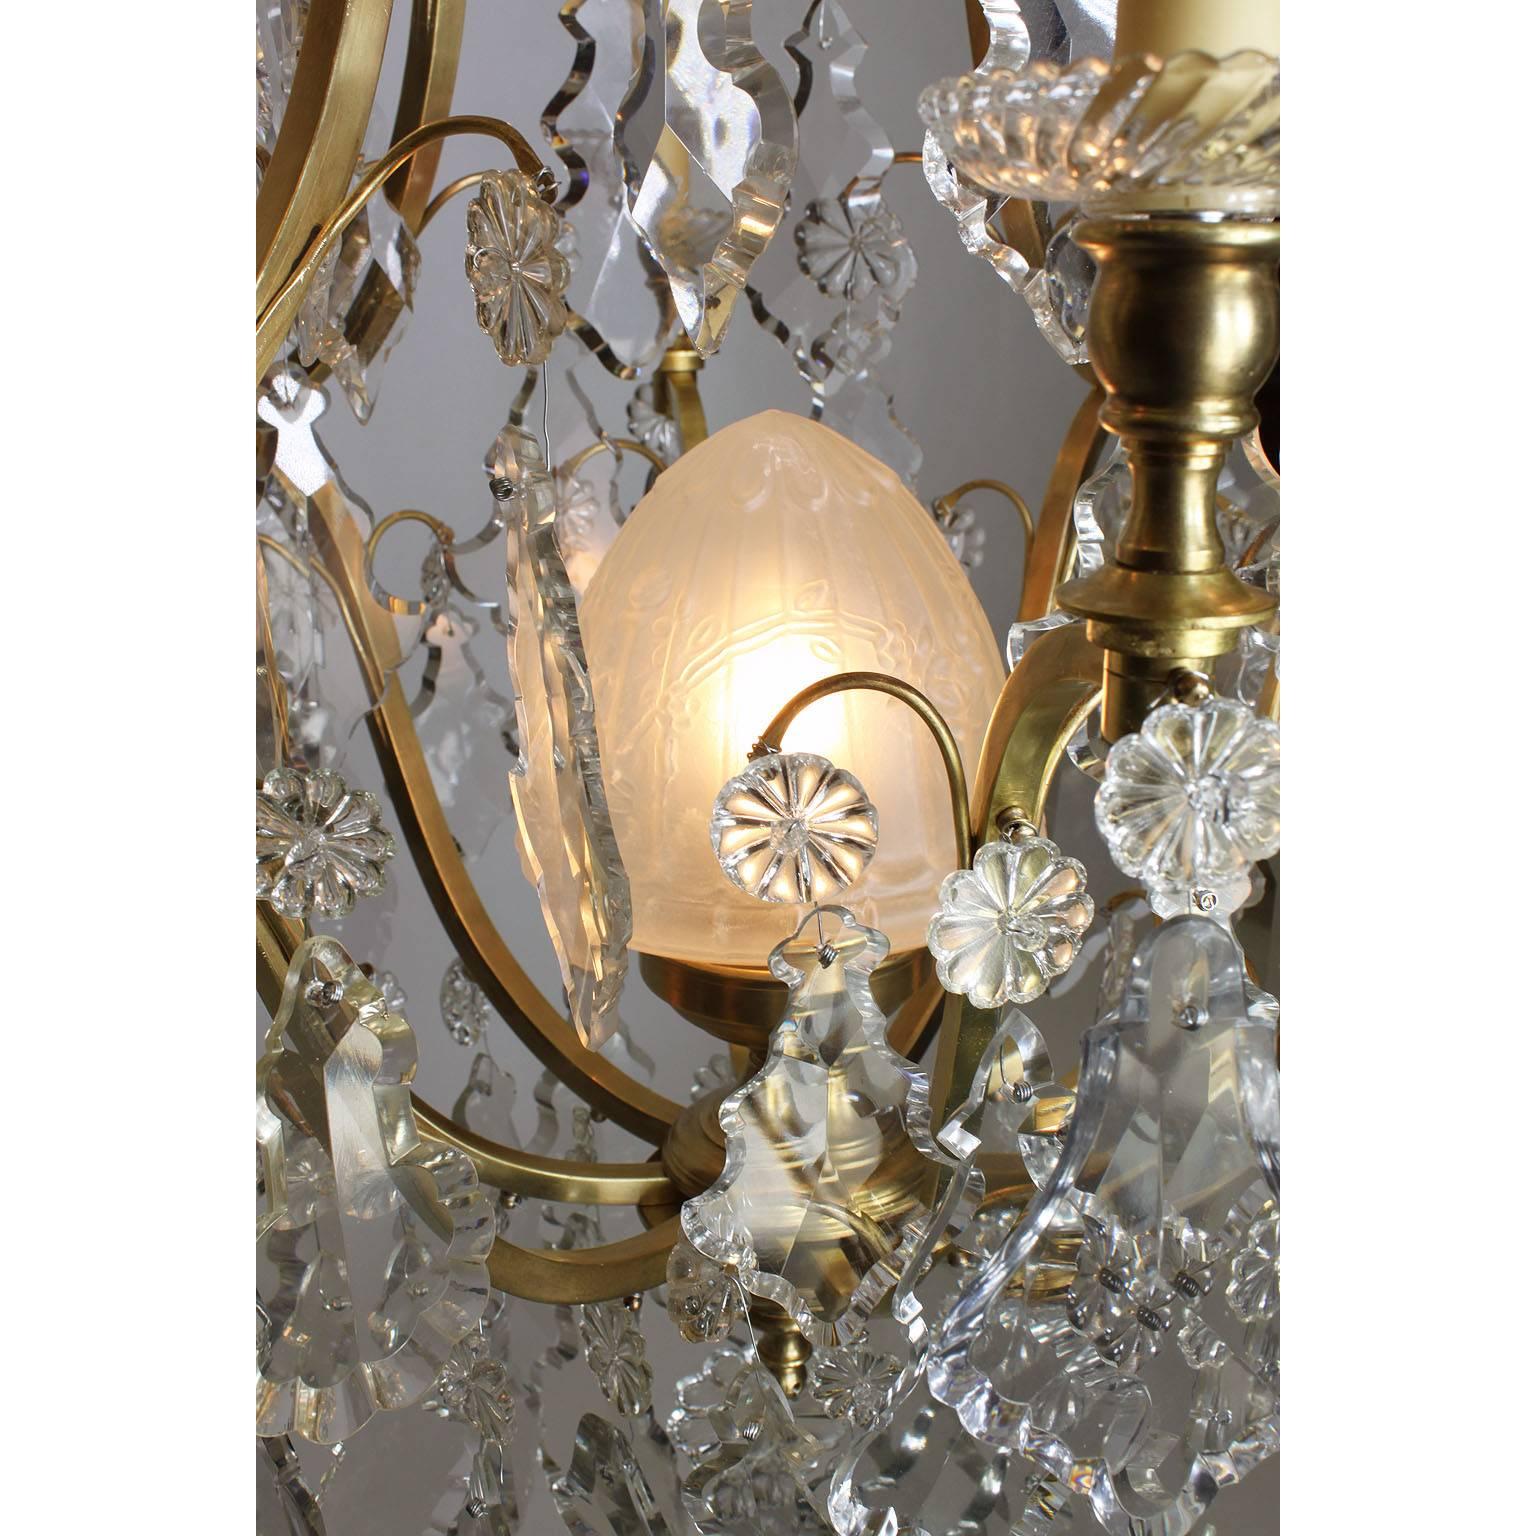 Early 20th Century French Louis XV Style Gilt Bronze and Cut-Glass 'Crystal' Nine-Light Chandelier For Sale